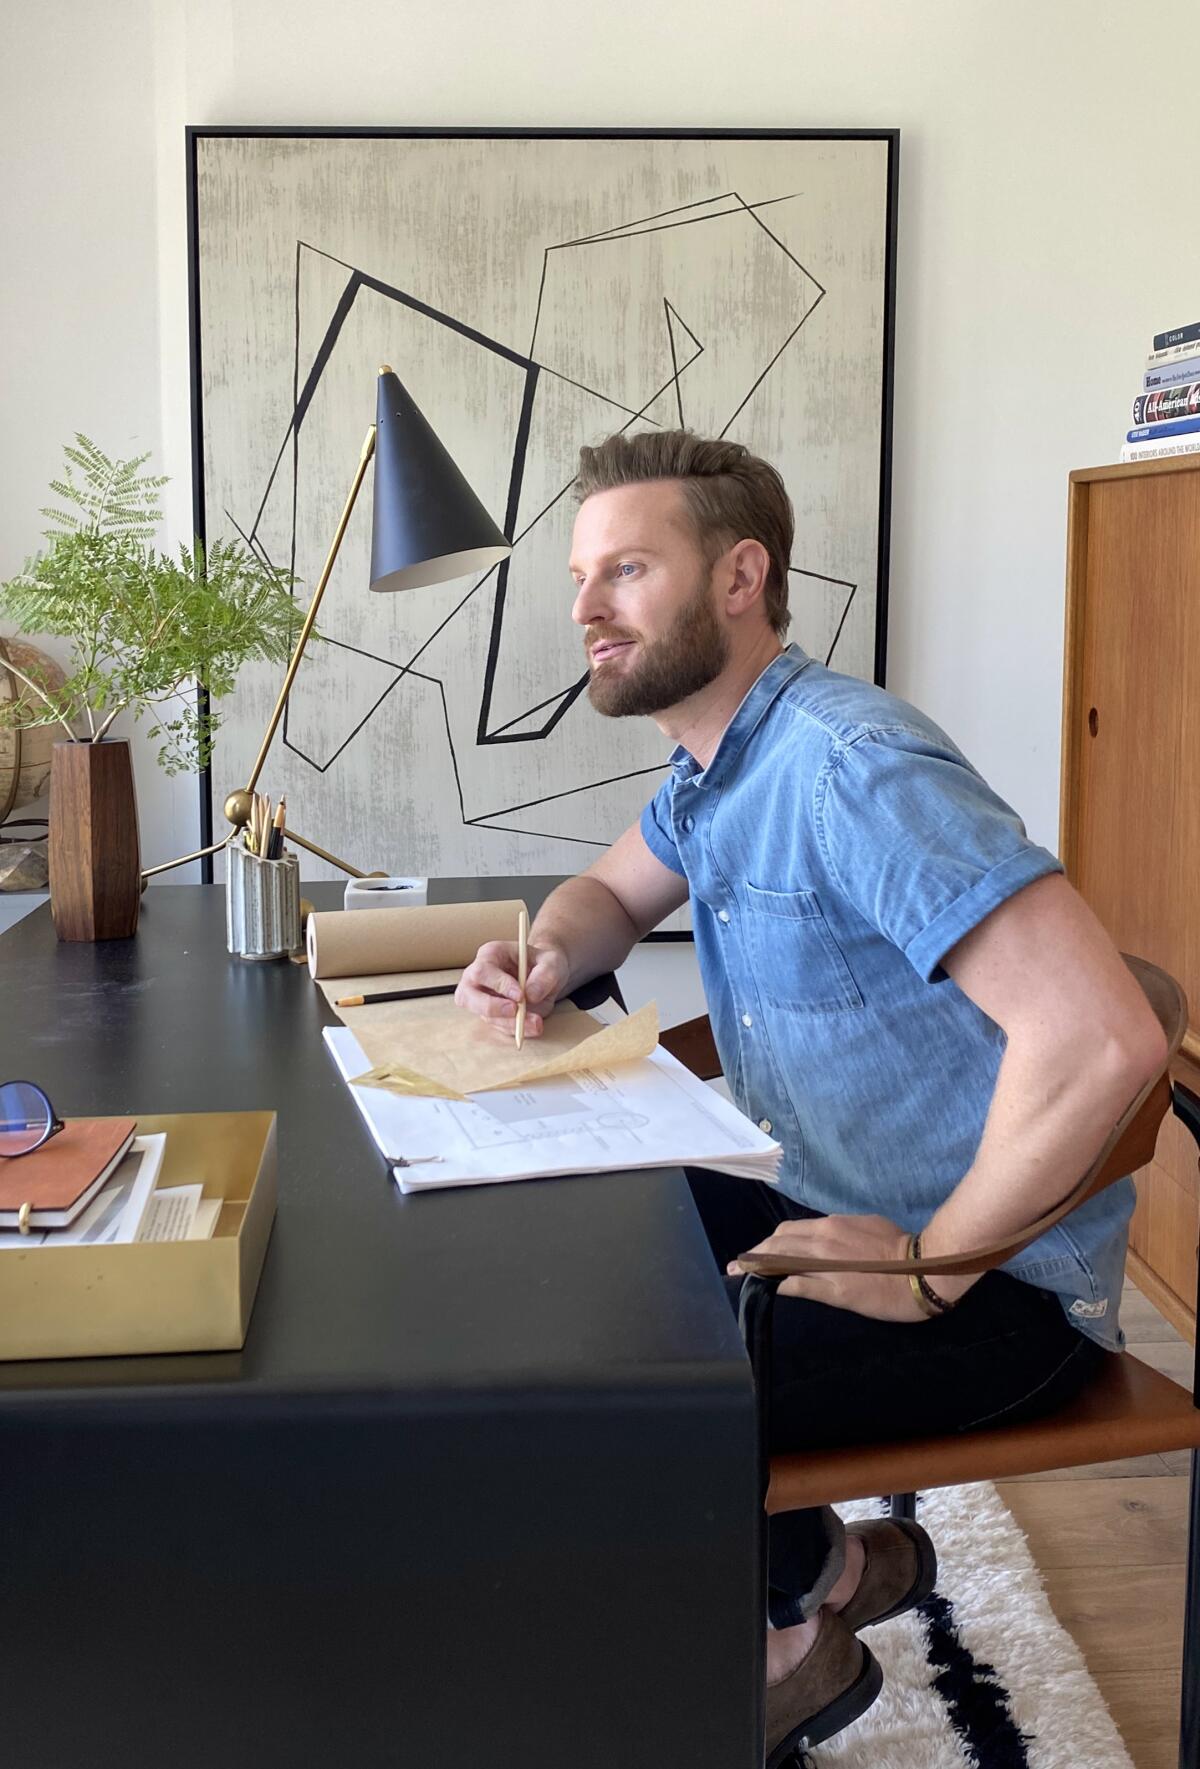 "Queer Eye" design expert Bobby Berk, pictured in his home office, will examine the Emmy winners' home decor.